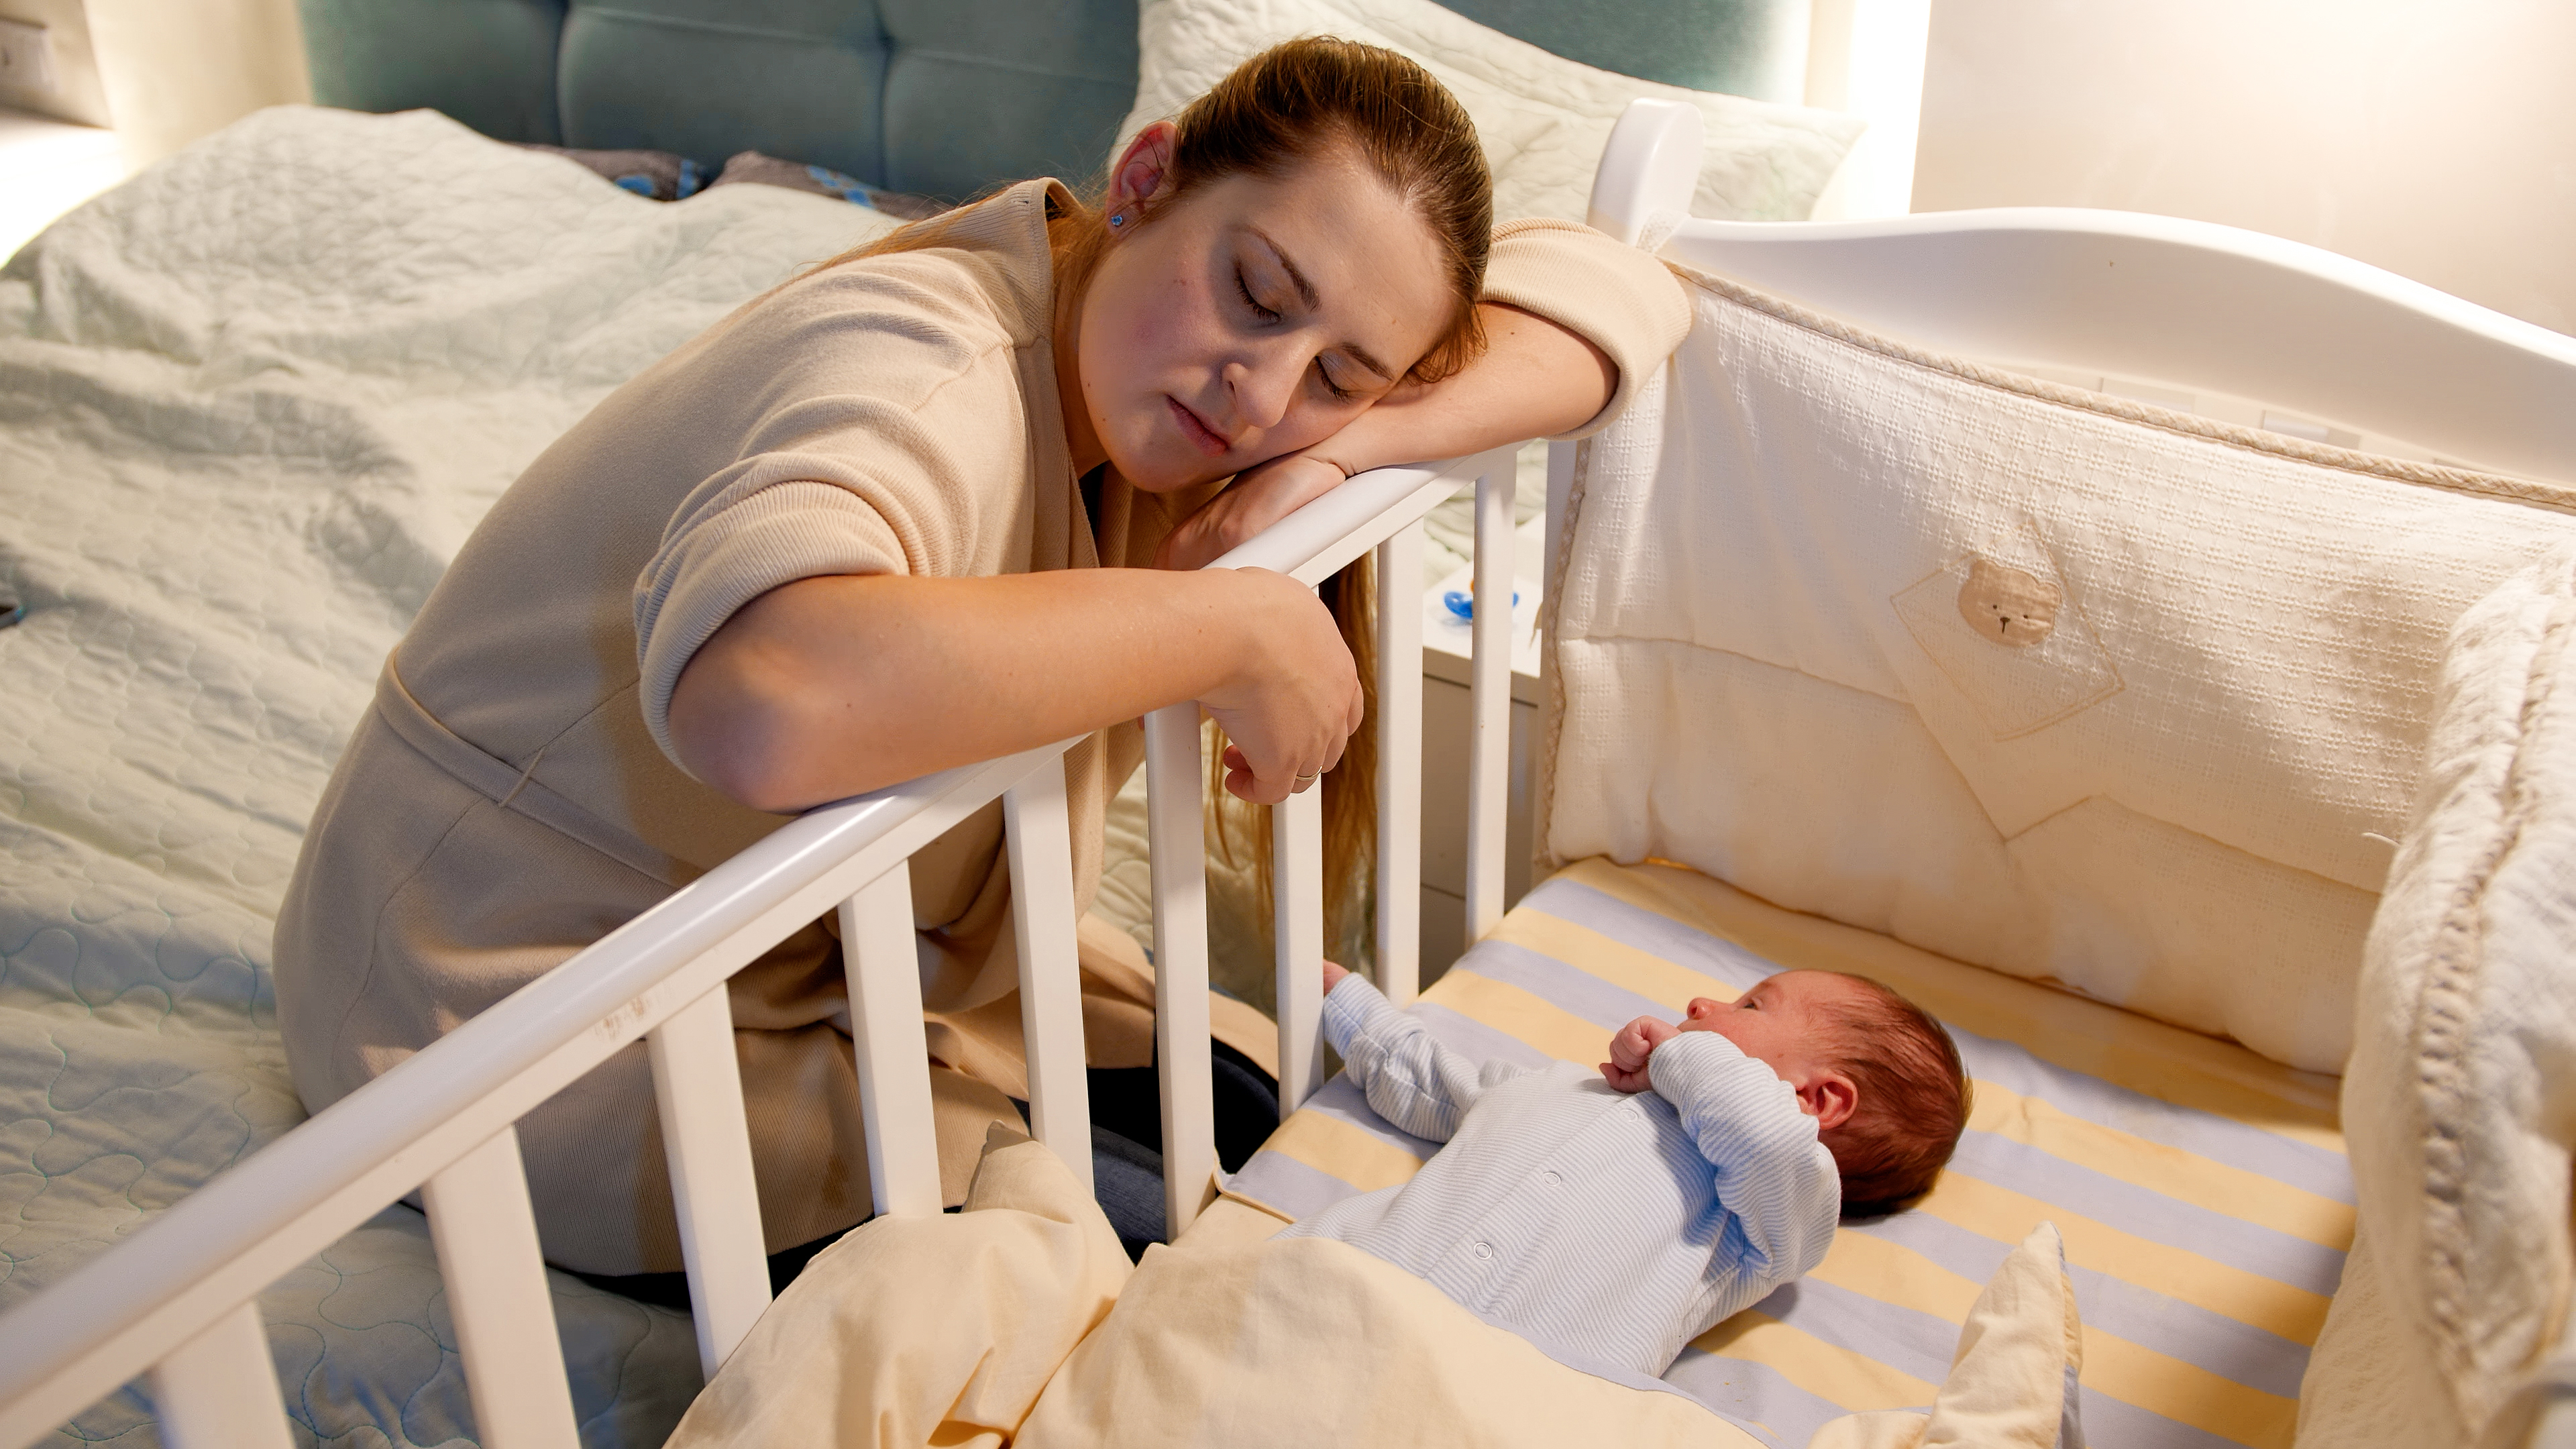 Tired mother sleeping by her child's crib | Source: Shutterstock